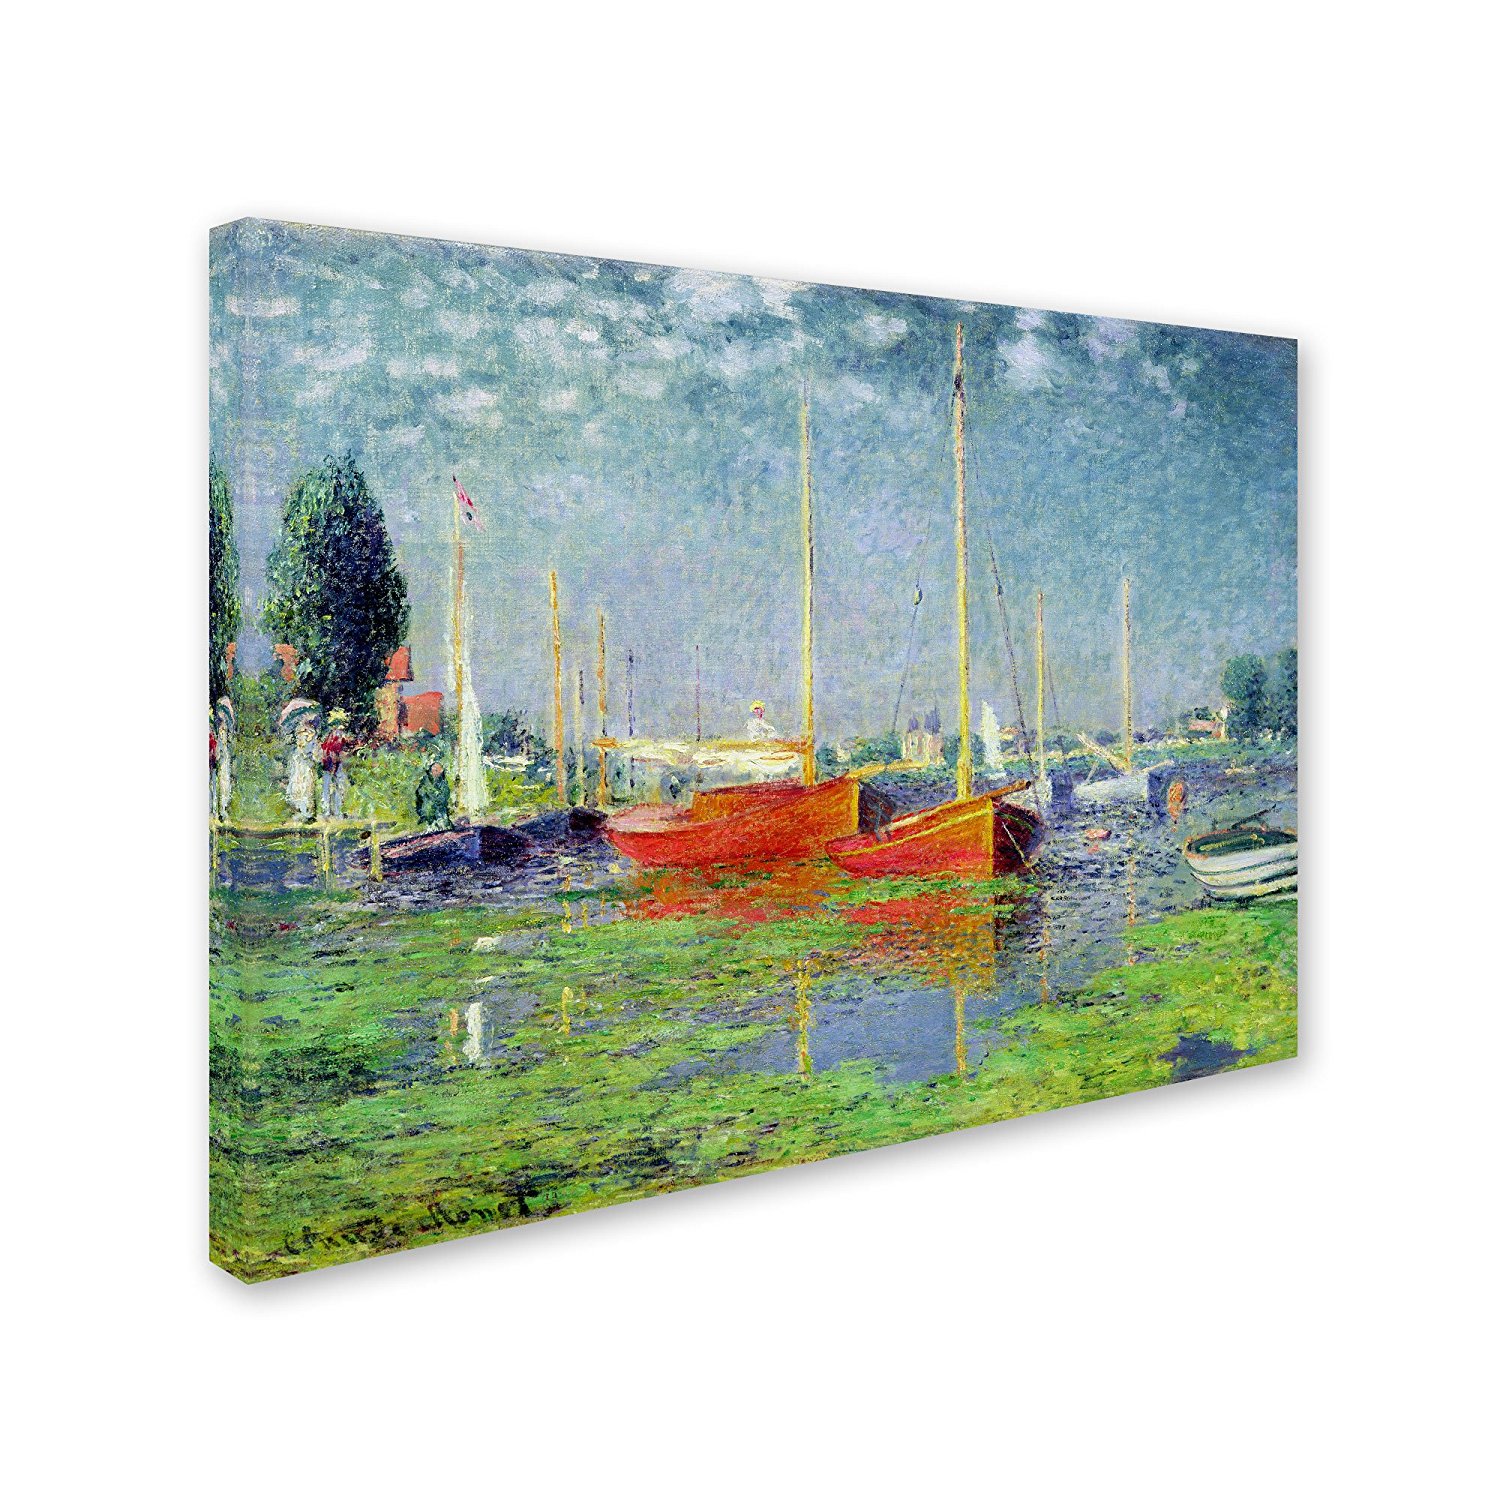 Argenteuil by Claude Monet Canvas Wall Art Picture Print On Canvas Drop shipping